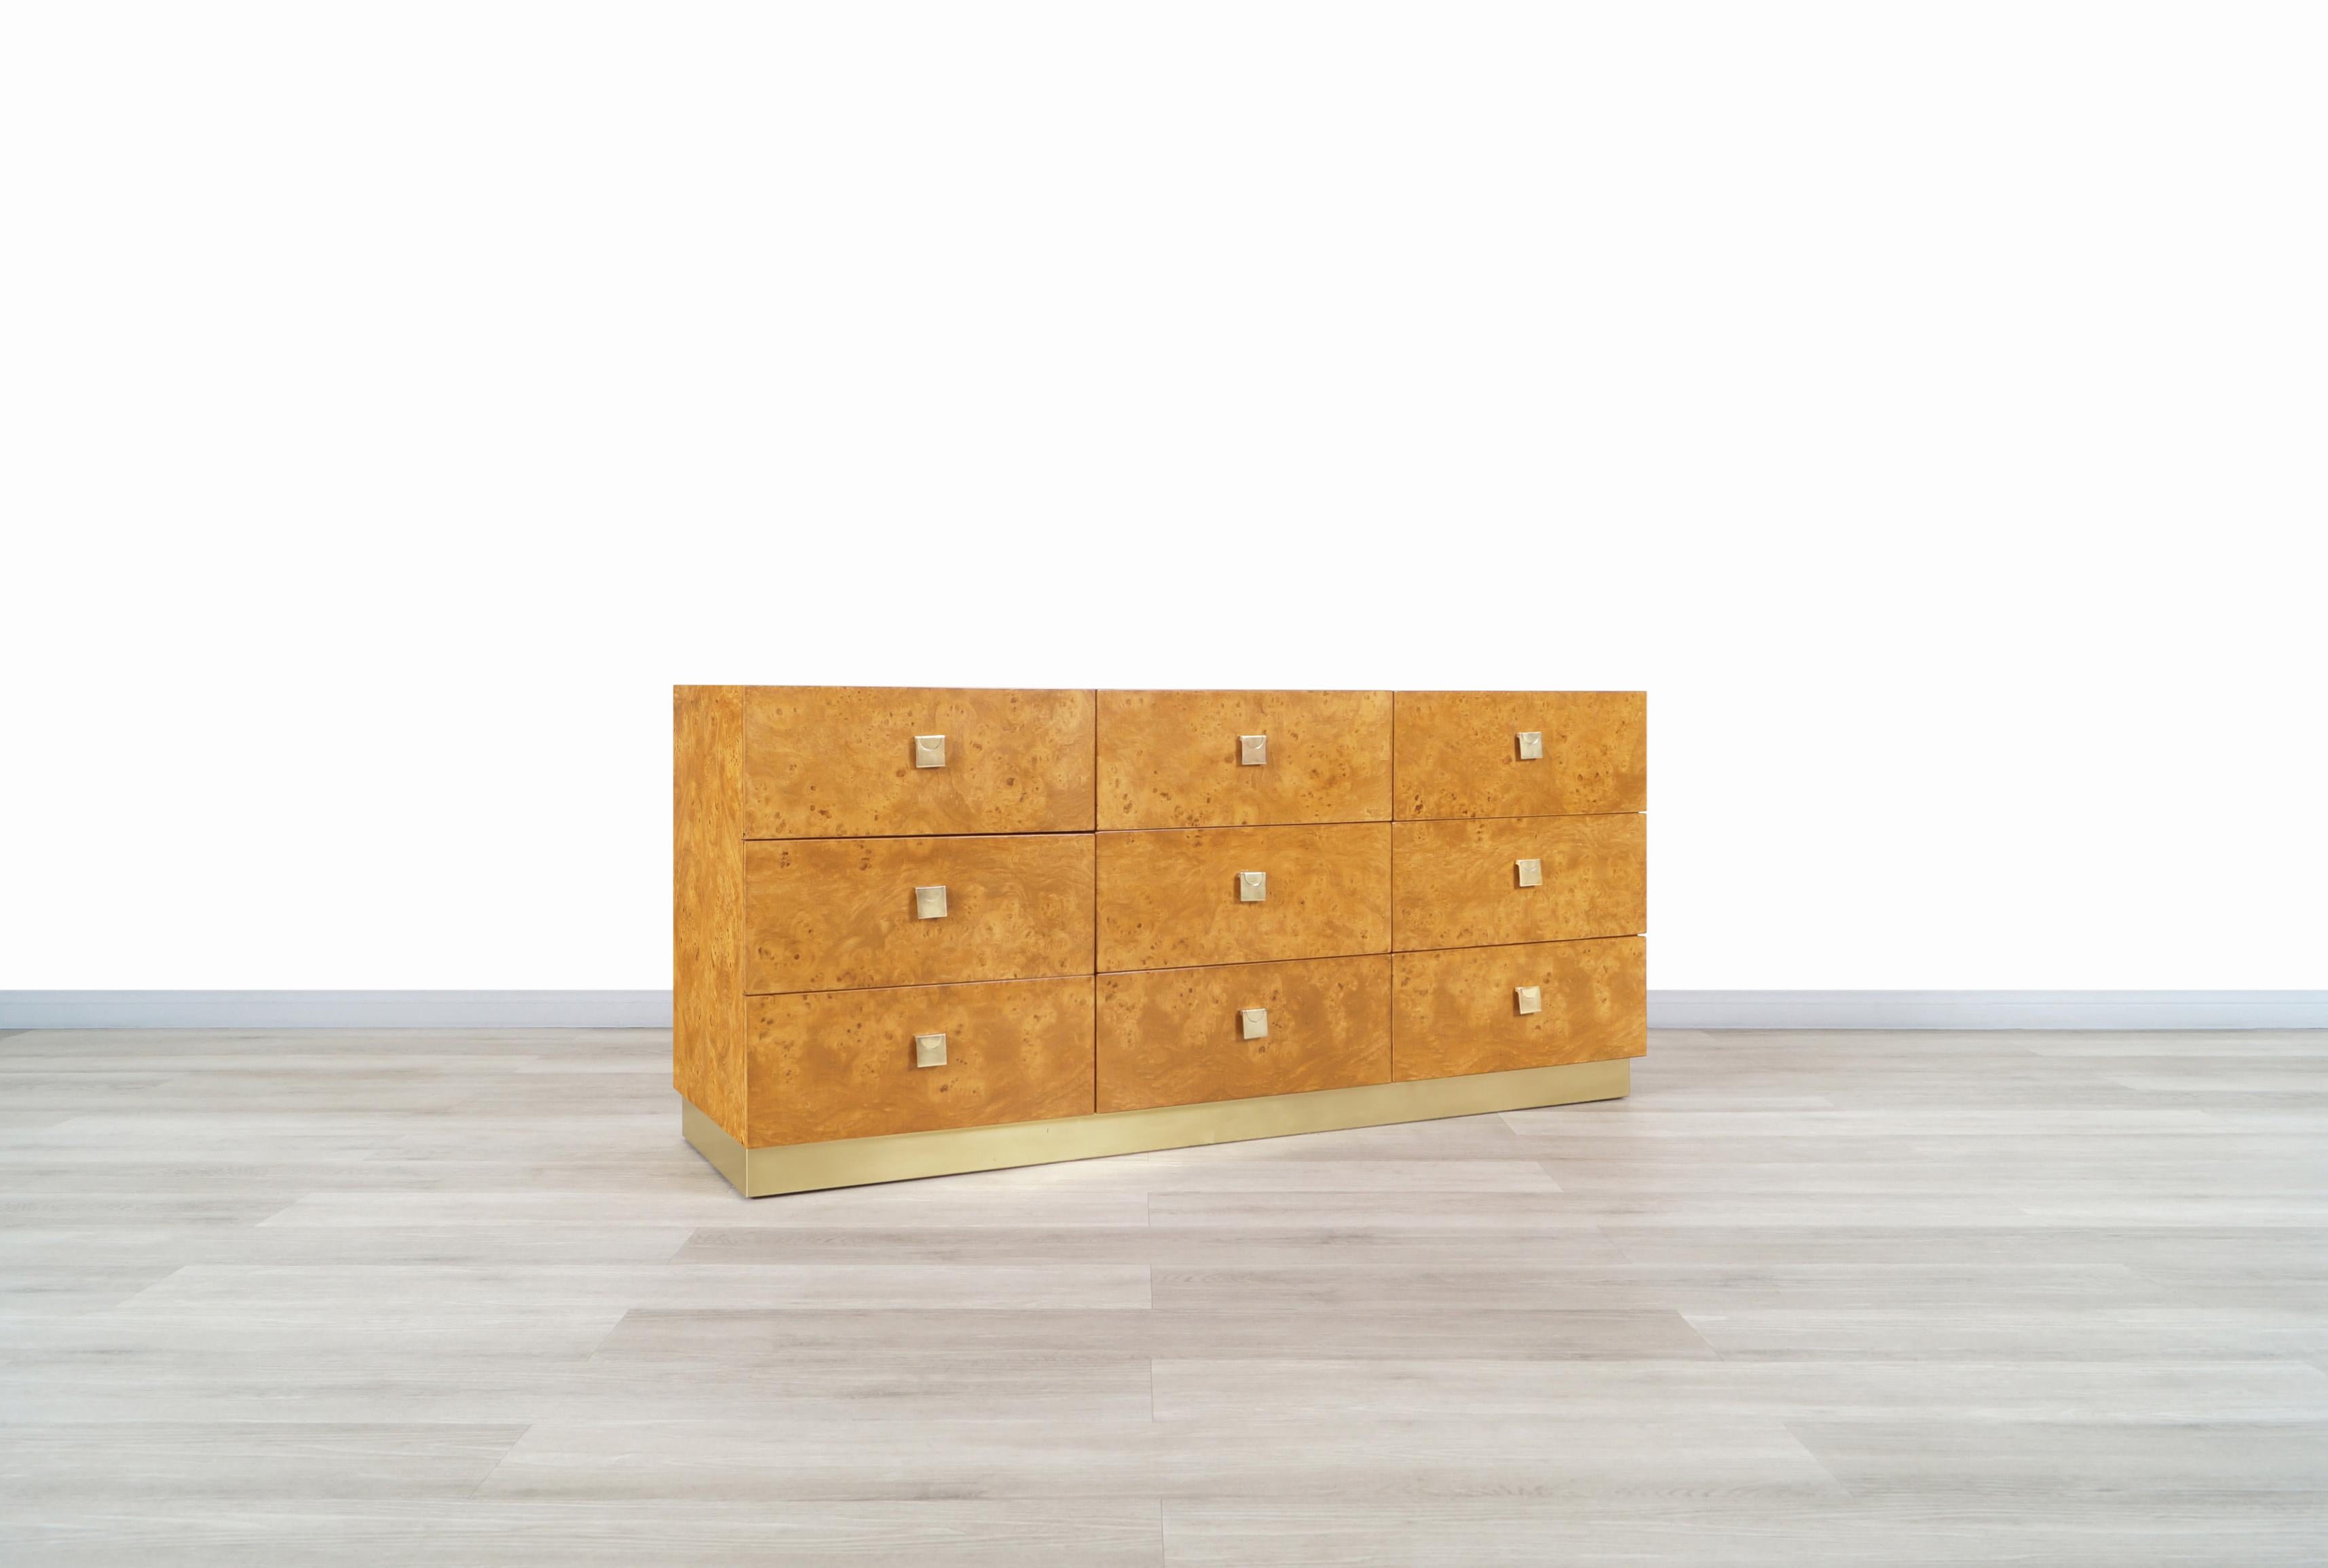 Wonderful vintage burl wood and brass dresser manufactured by Founders in the United States, circa 1980s. This dresser is inspired by the iconic designs of the famous designer Milo Baughman. This collection was characterized by having fine furniture